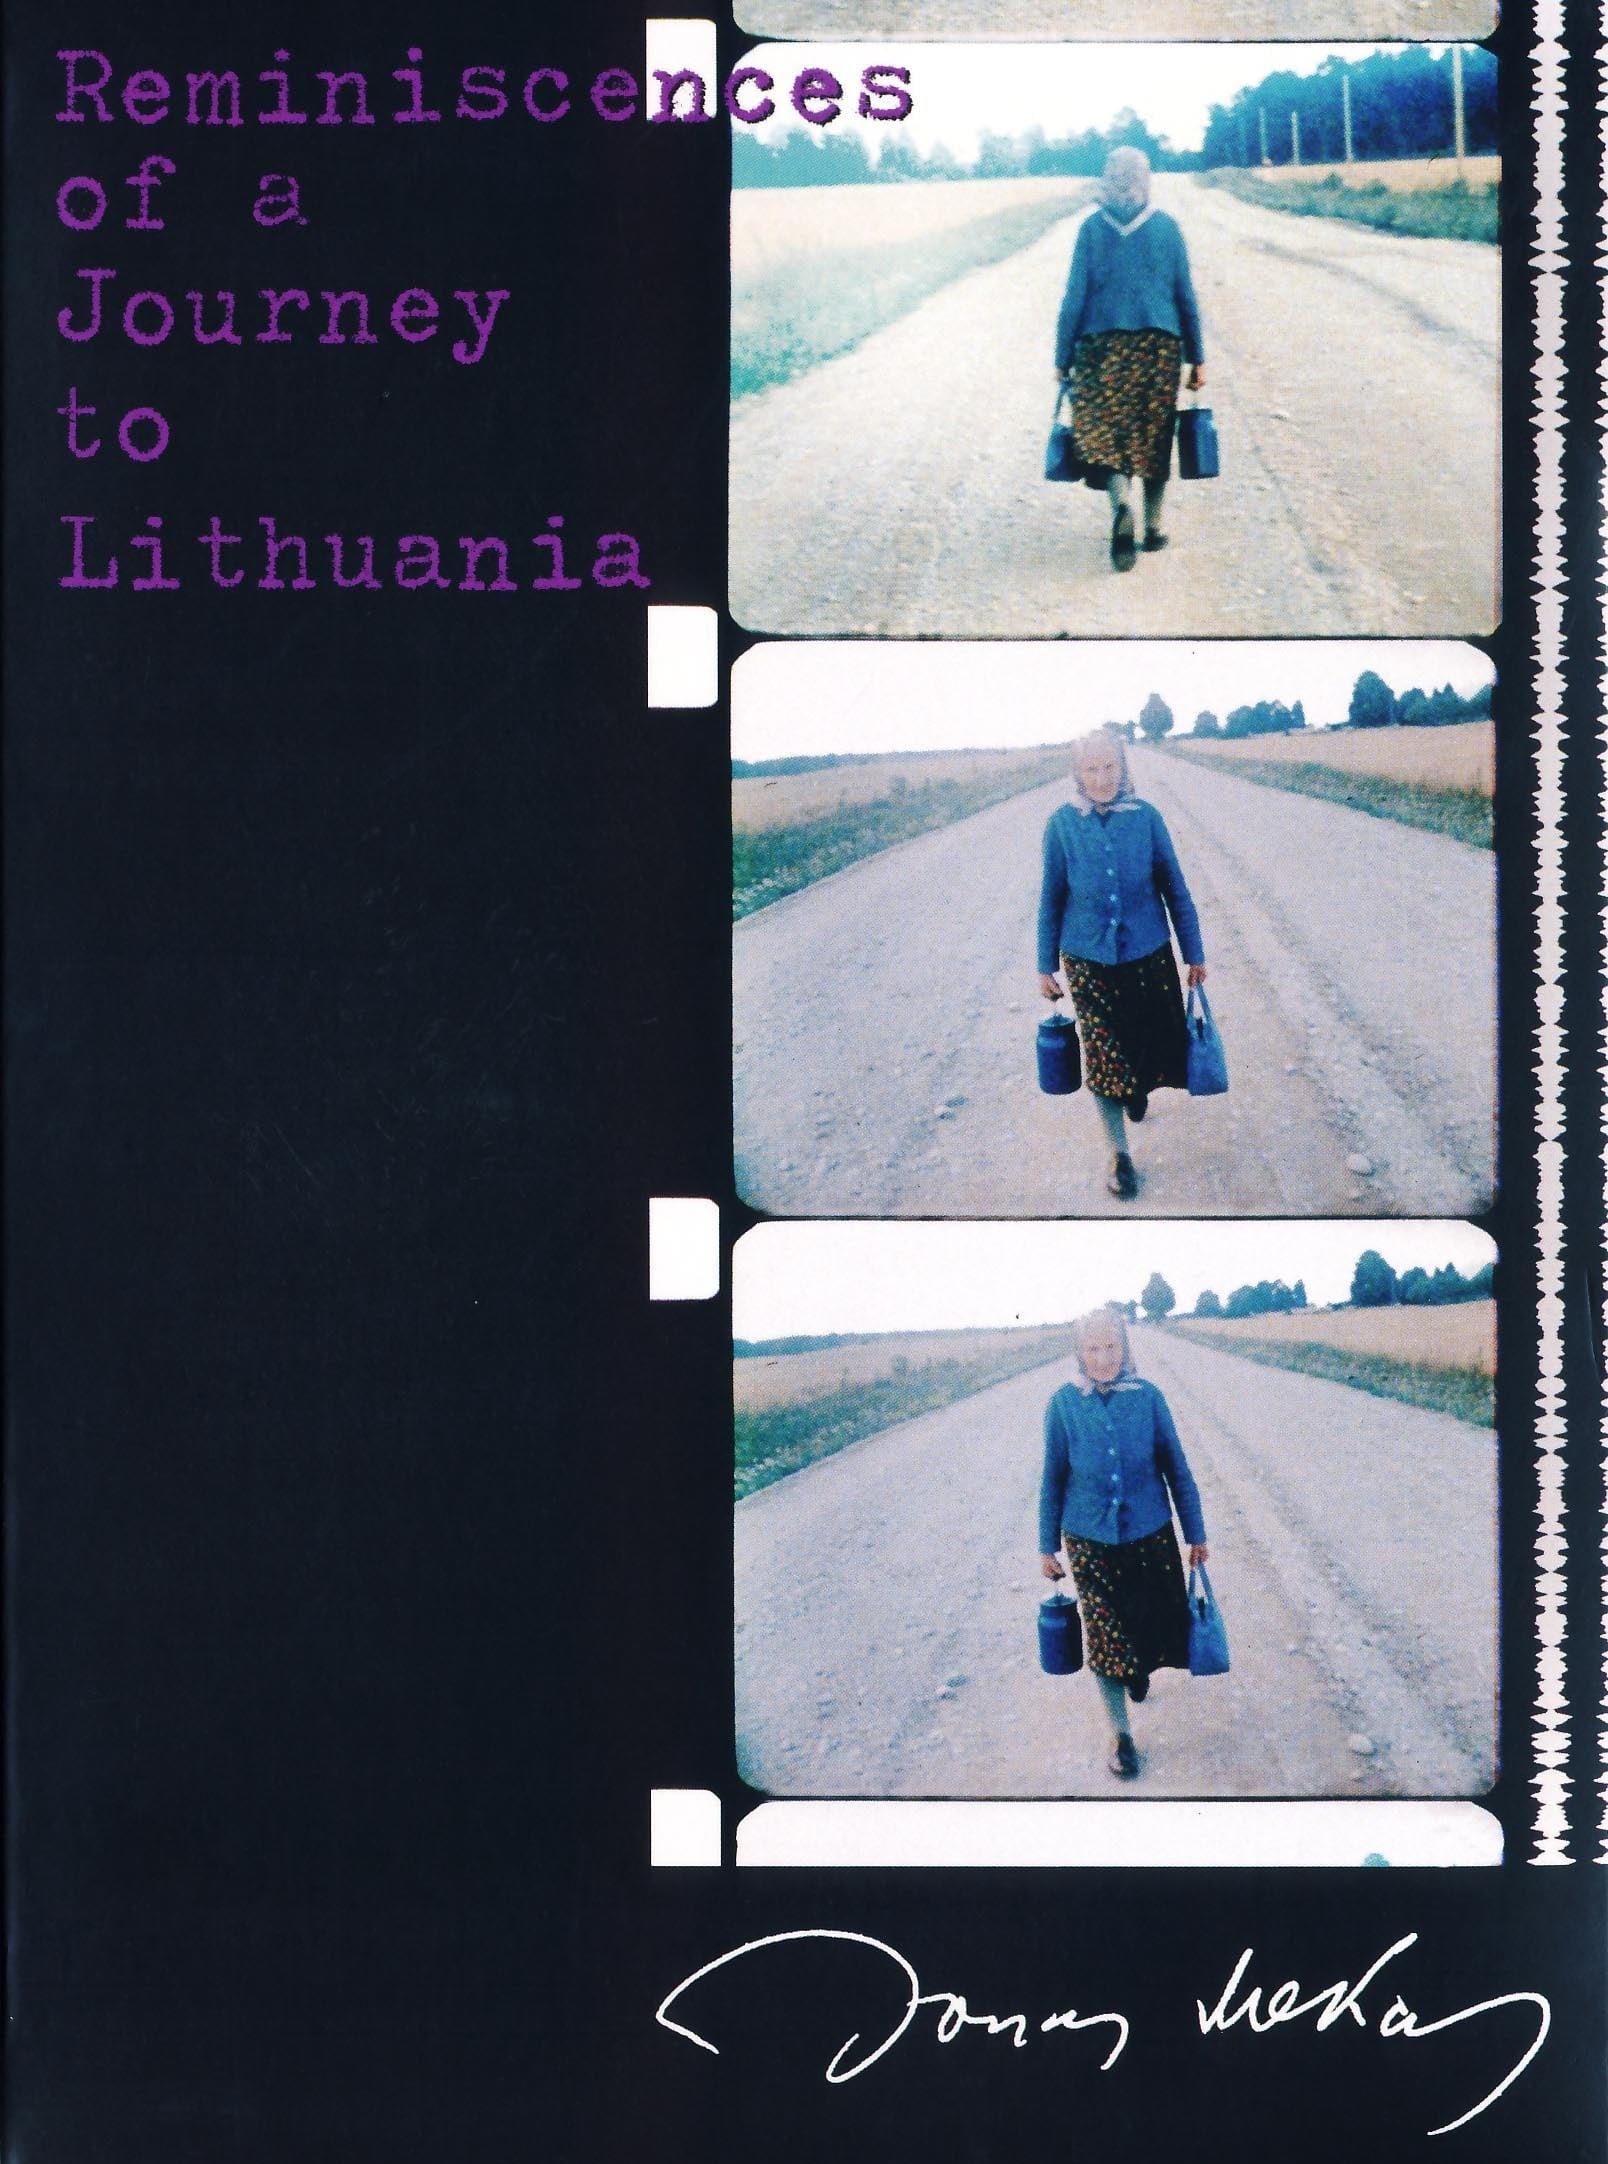 Reminiscences of a Journey to Lithuania poster